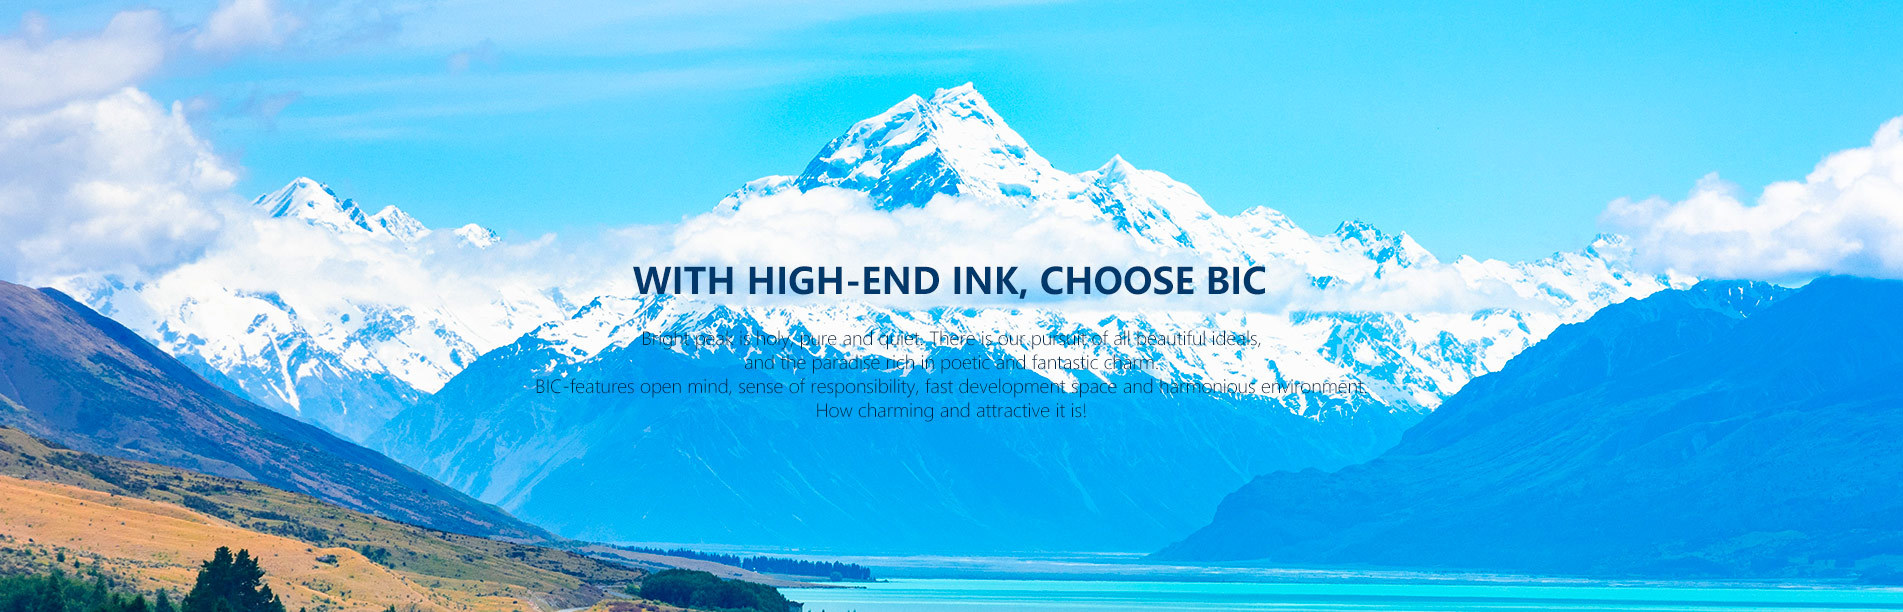 With high-end ink, choose BIC